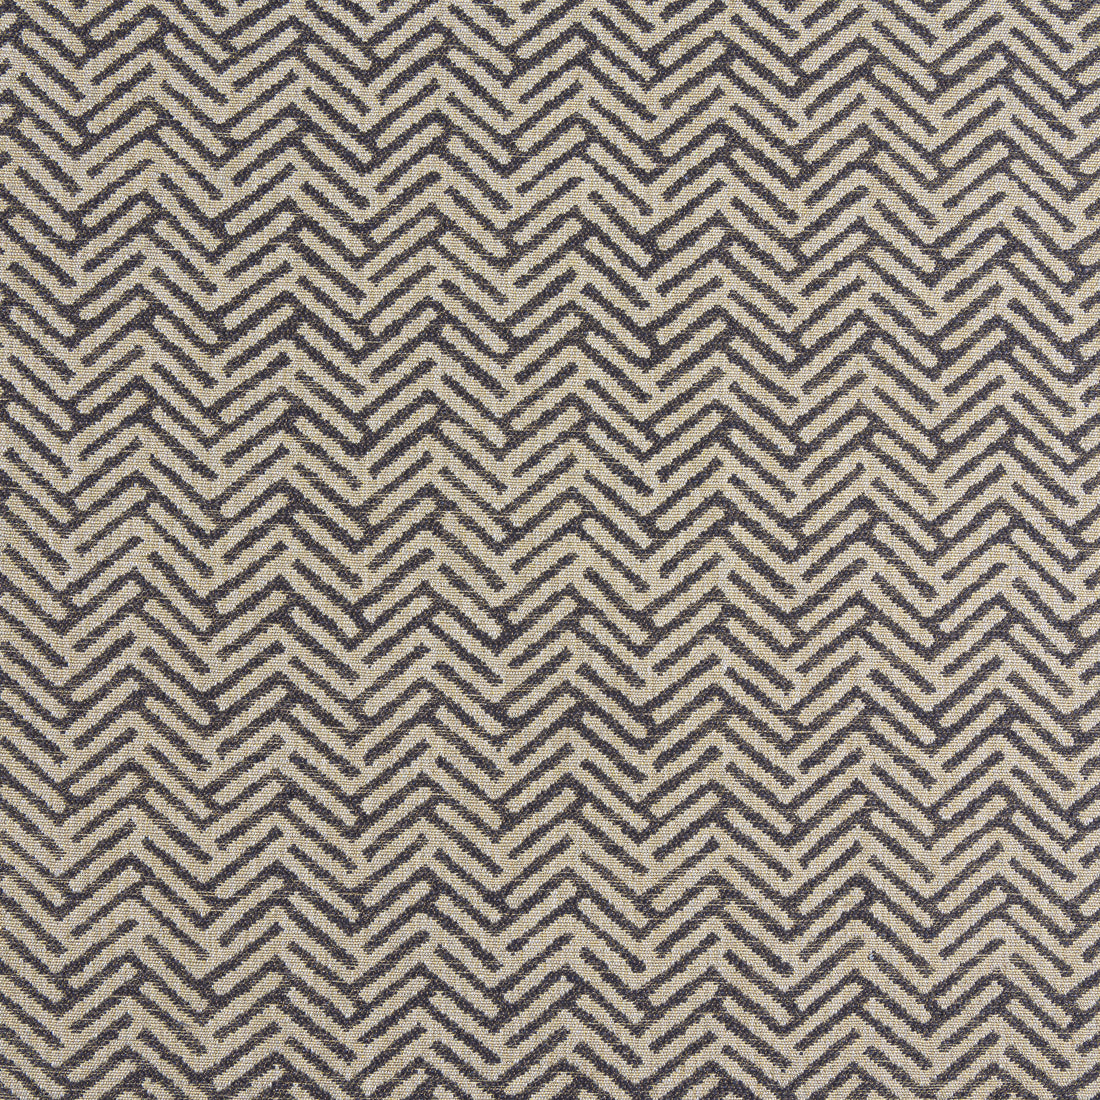 Varenna fabric in smoke color - pattern number W8114 - by Thibaut in the Sereno collection